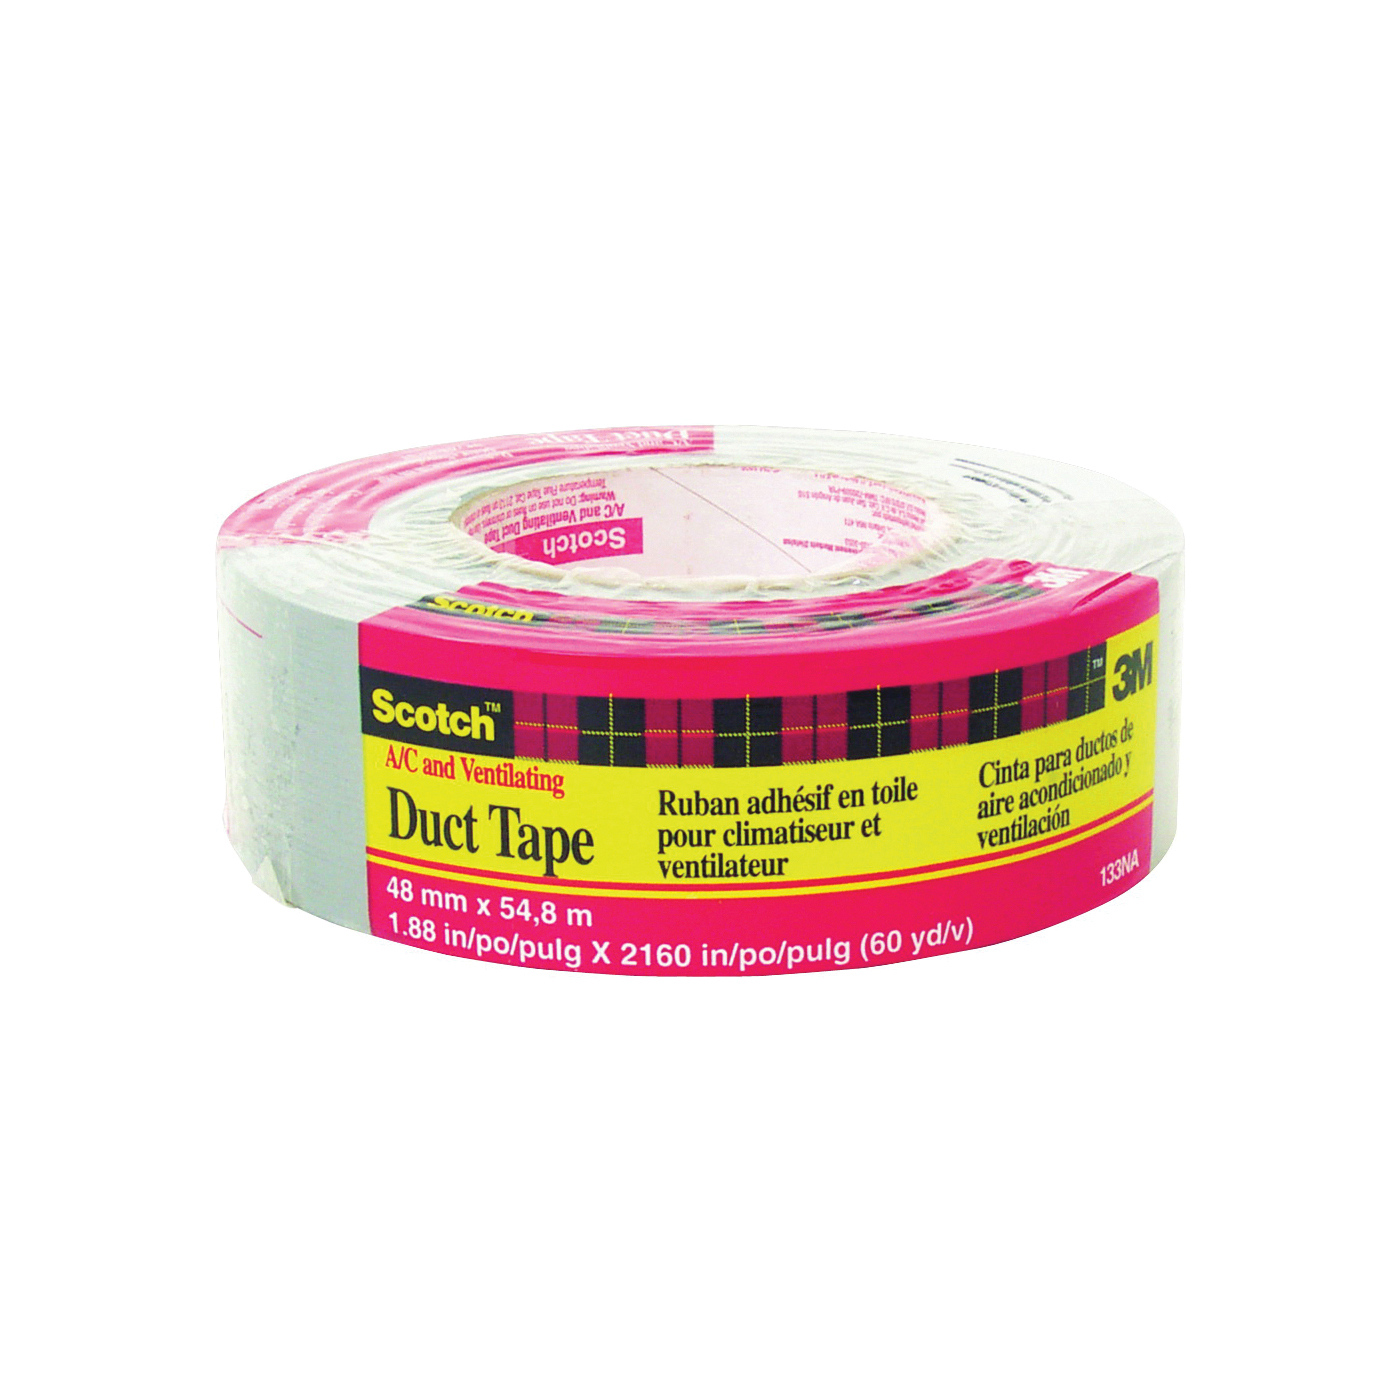 1260-A Duct Tape, 60 yd L, 1.88 in W, Gray